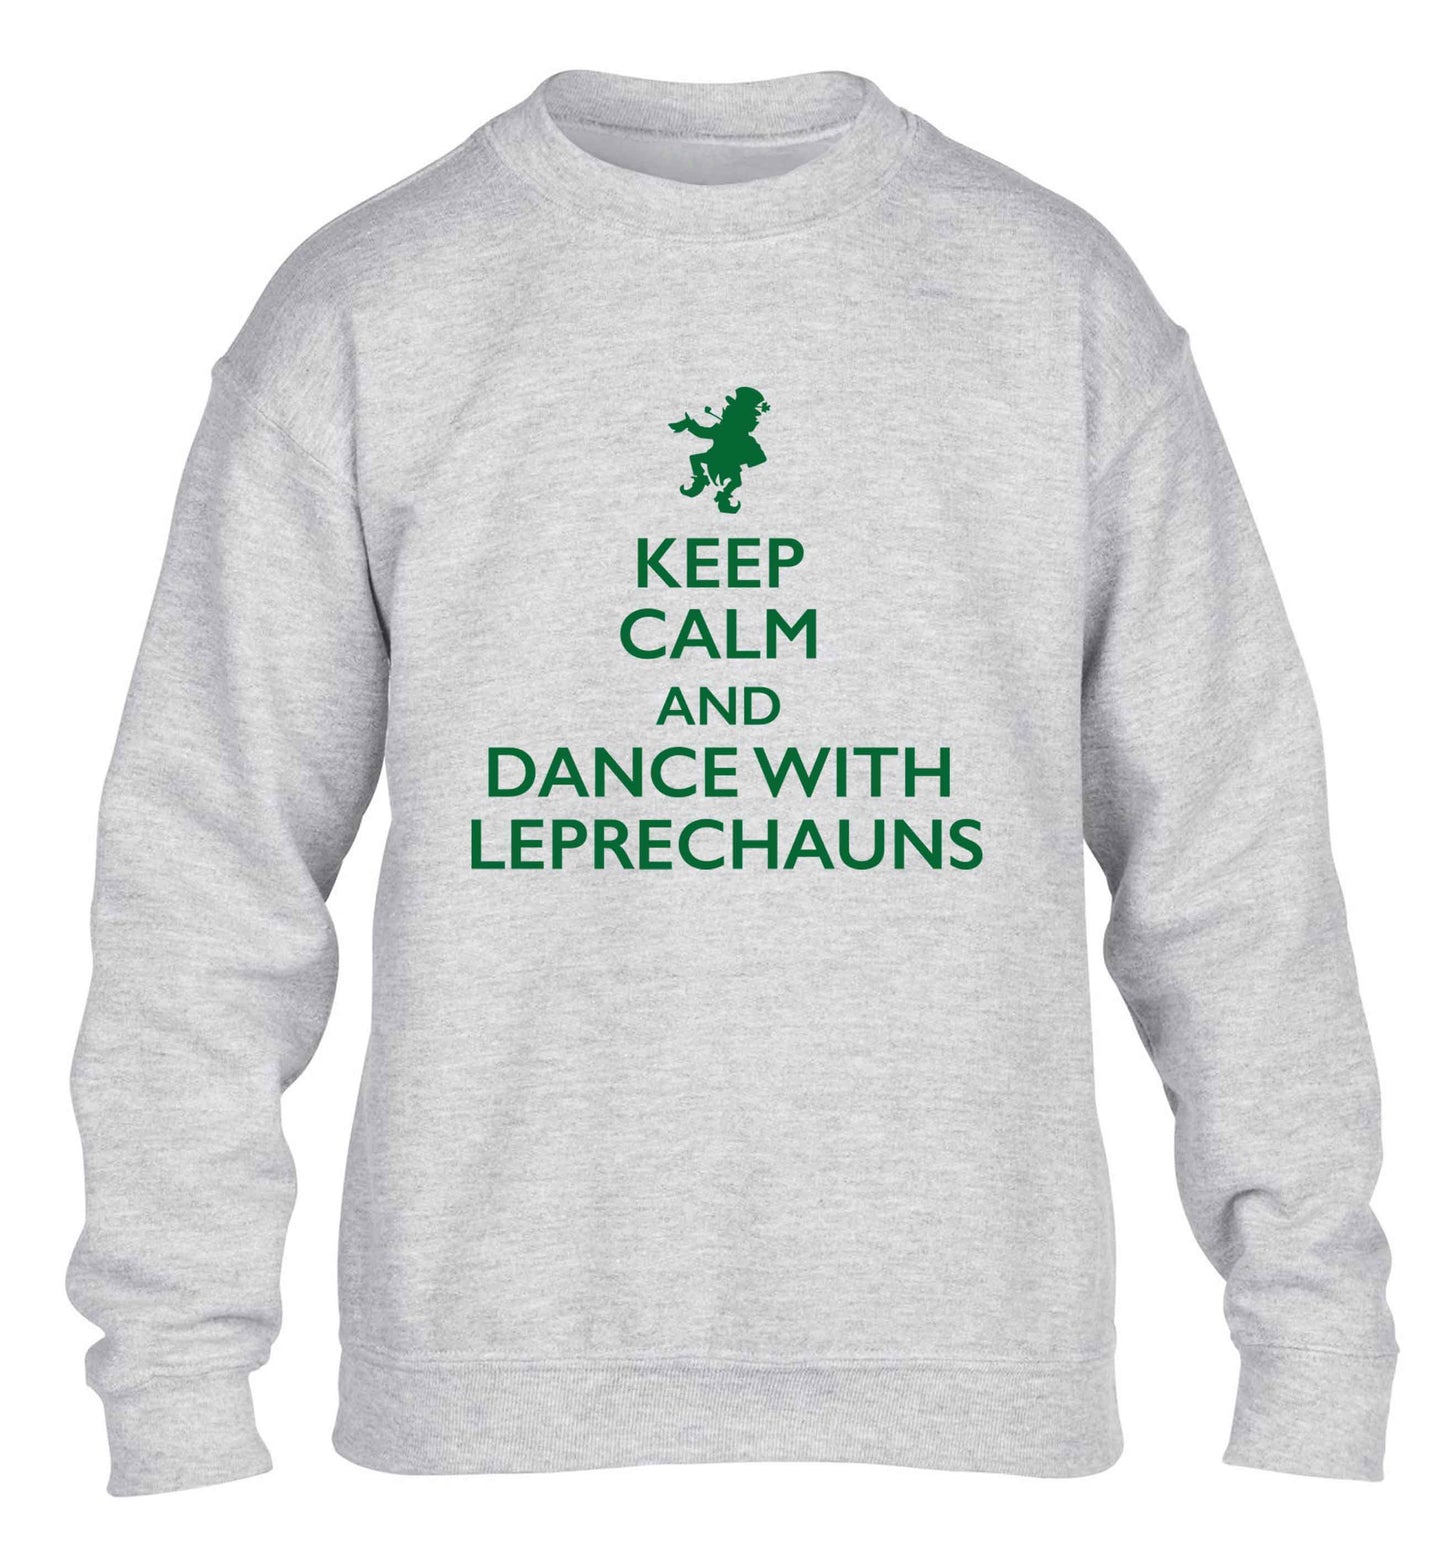 Keep calm and dance with leprechauns children's grey sweater 12-13 Years